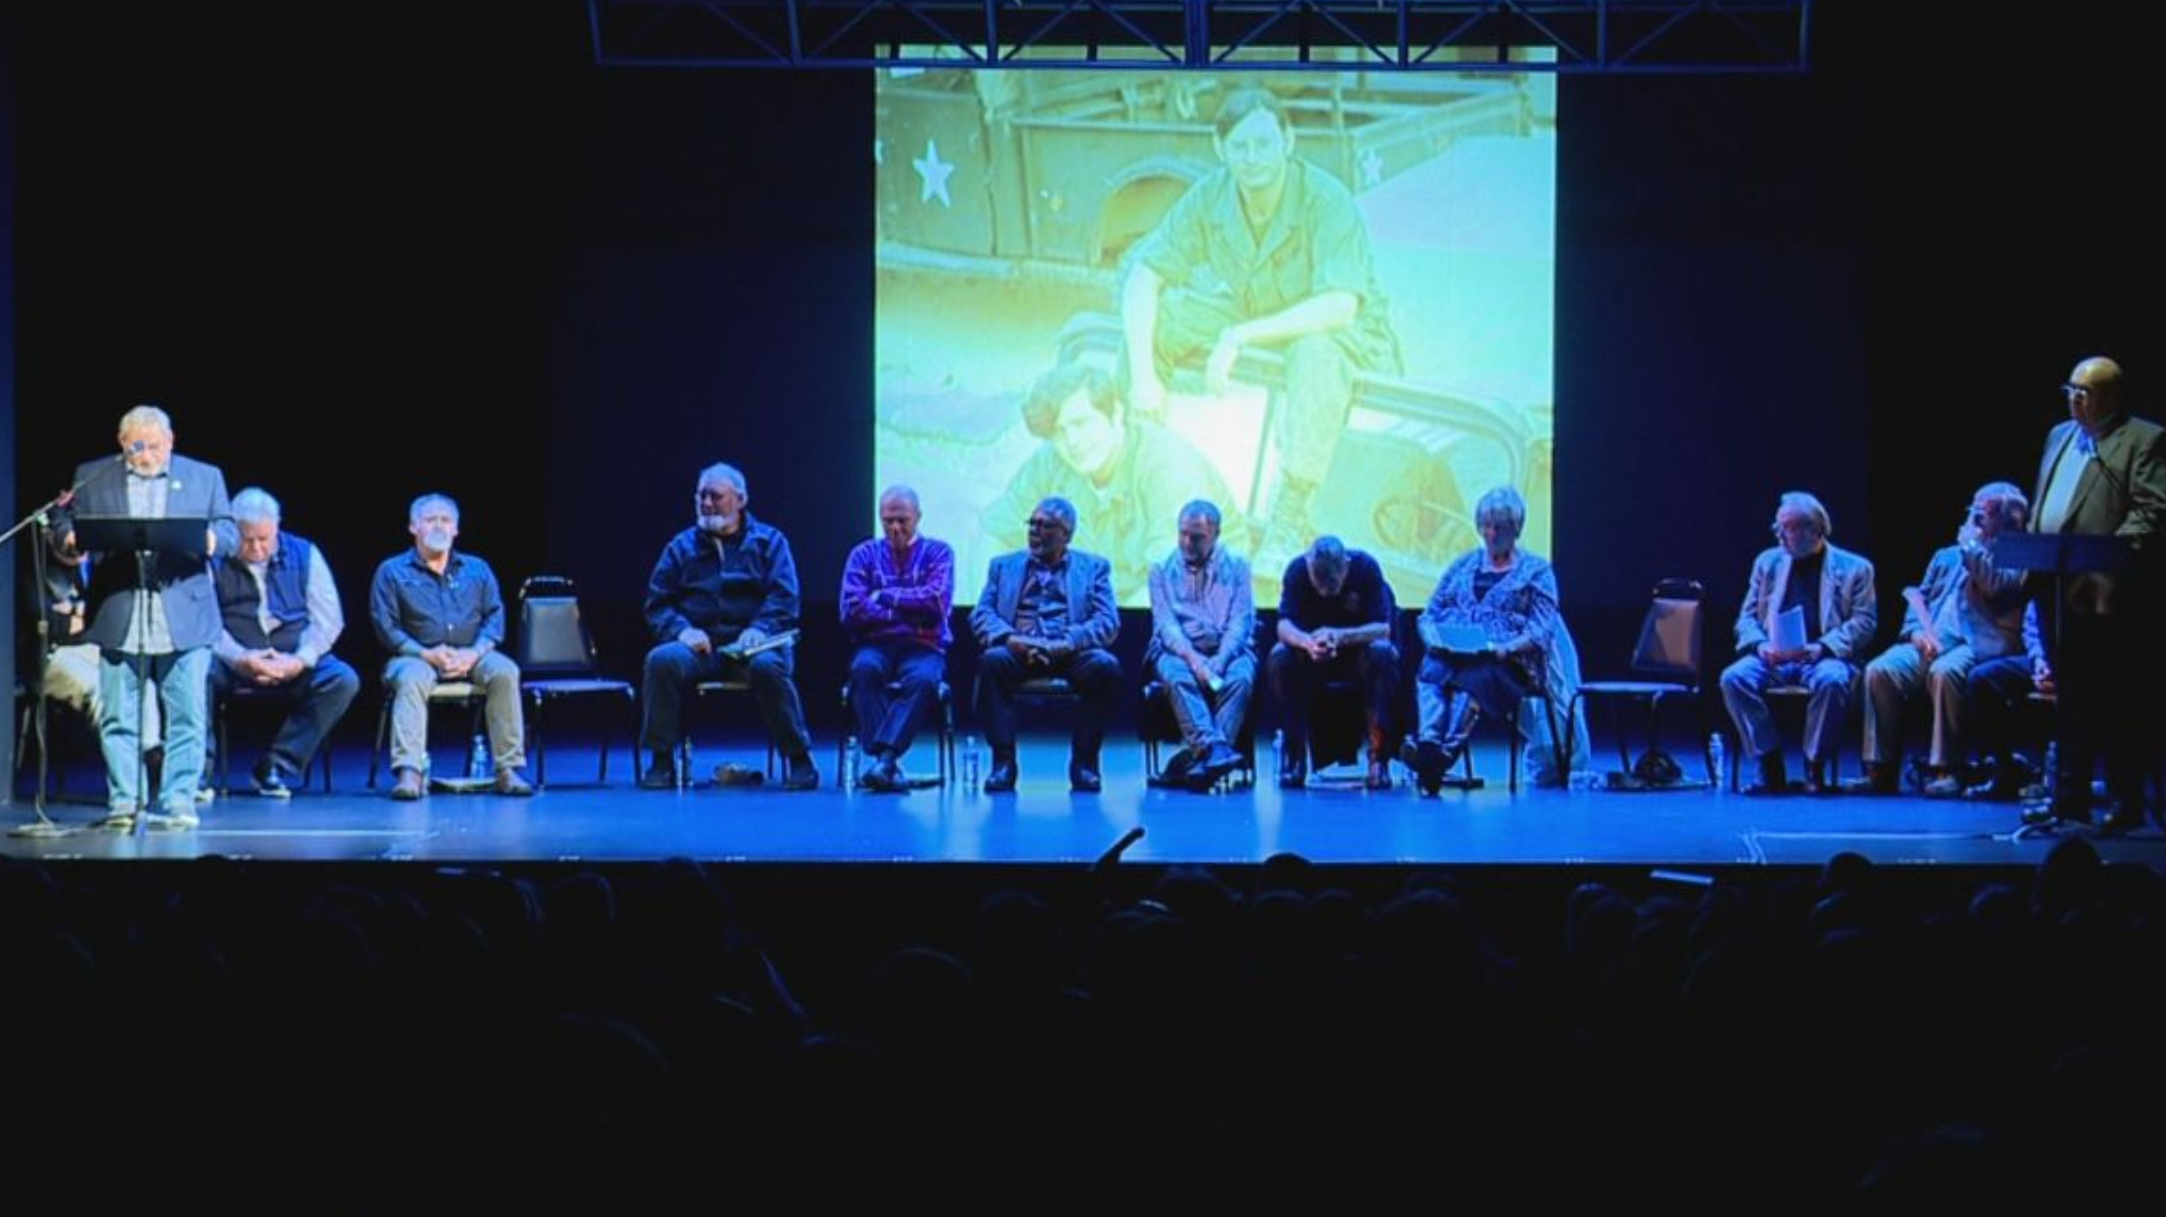 Veterans share poetry, written stories of war on stage